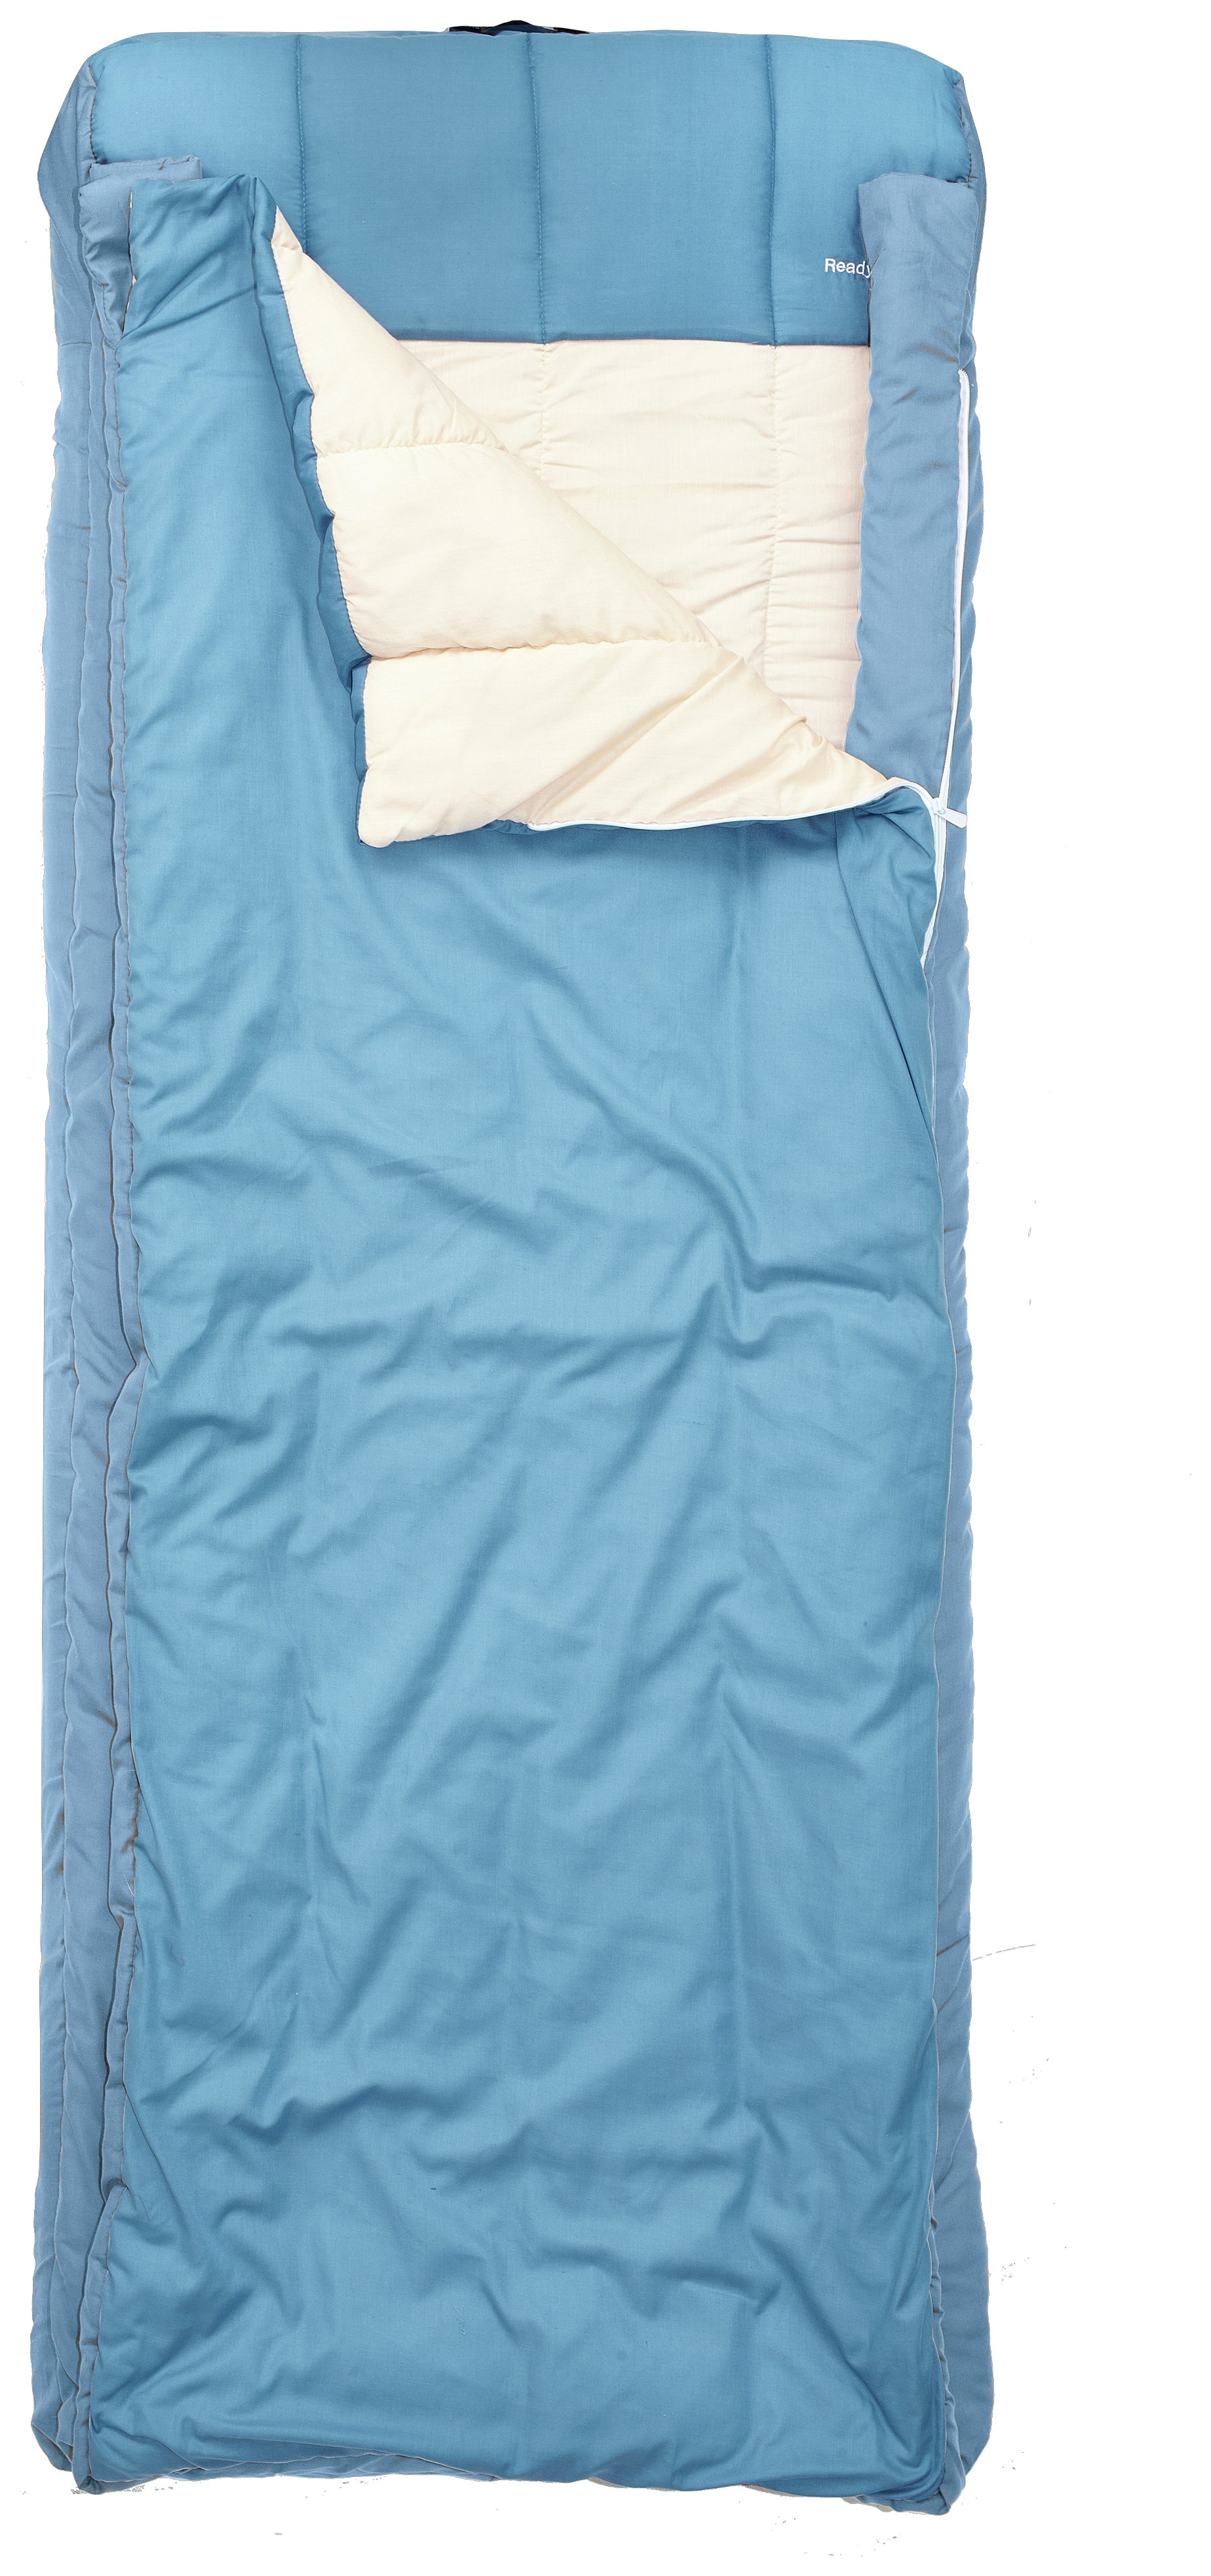 Single Guest ReadyBed - Inflatable Air Bed & Sleeping Bag